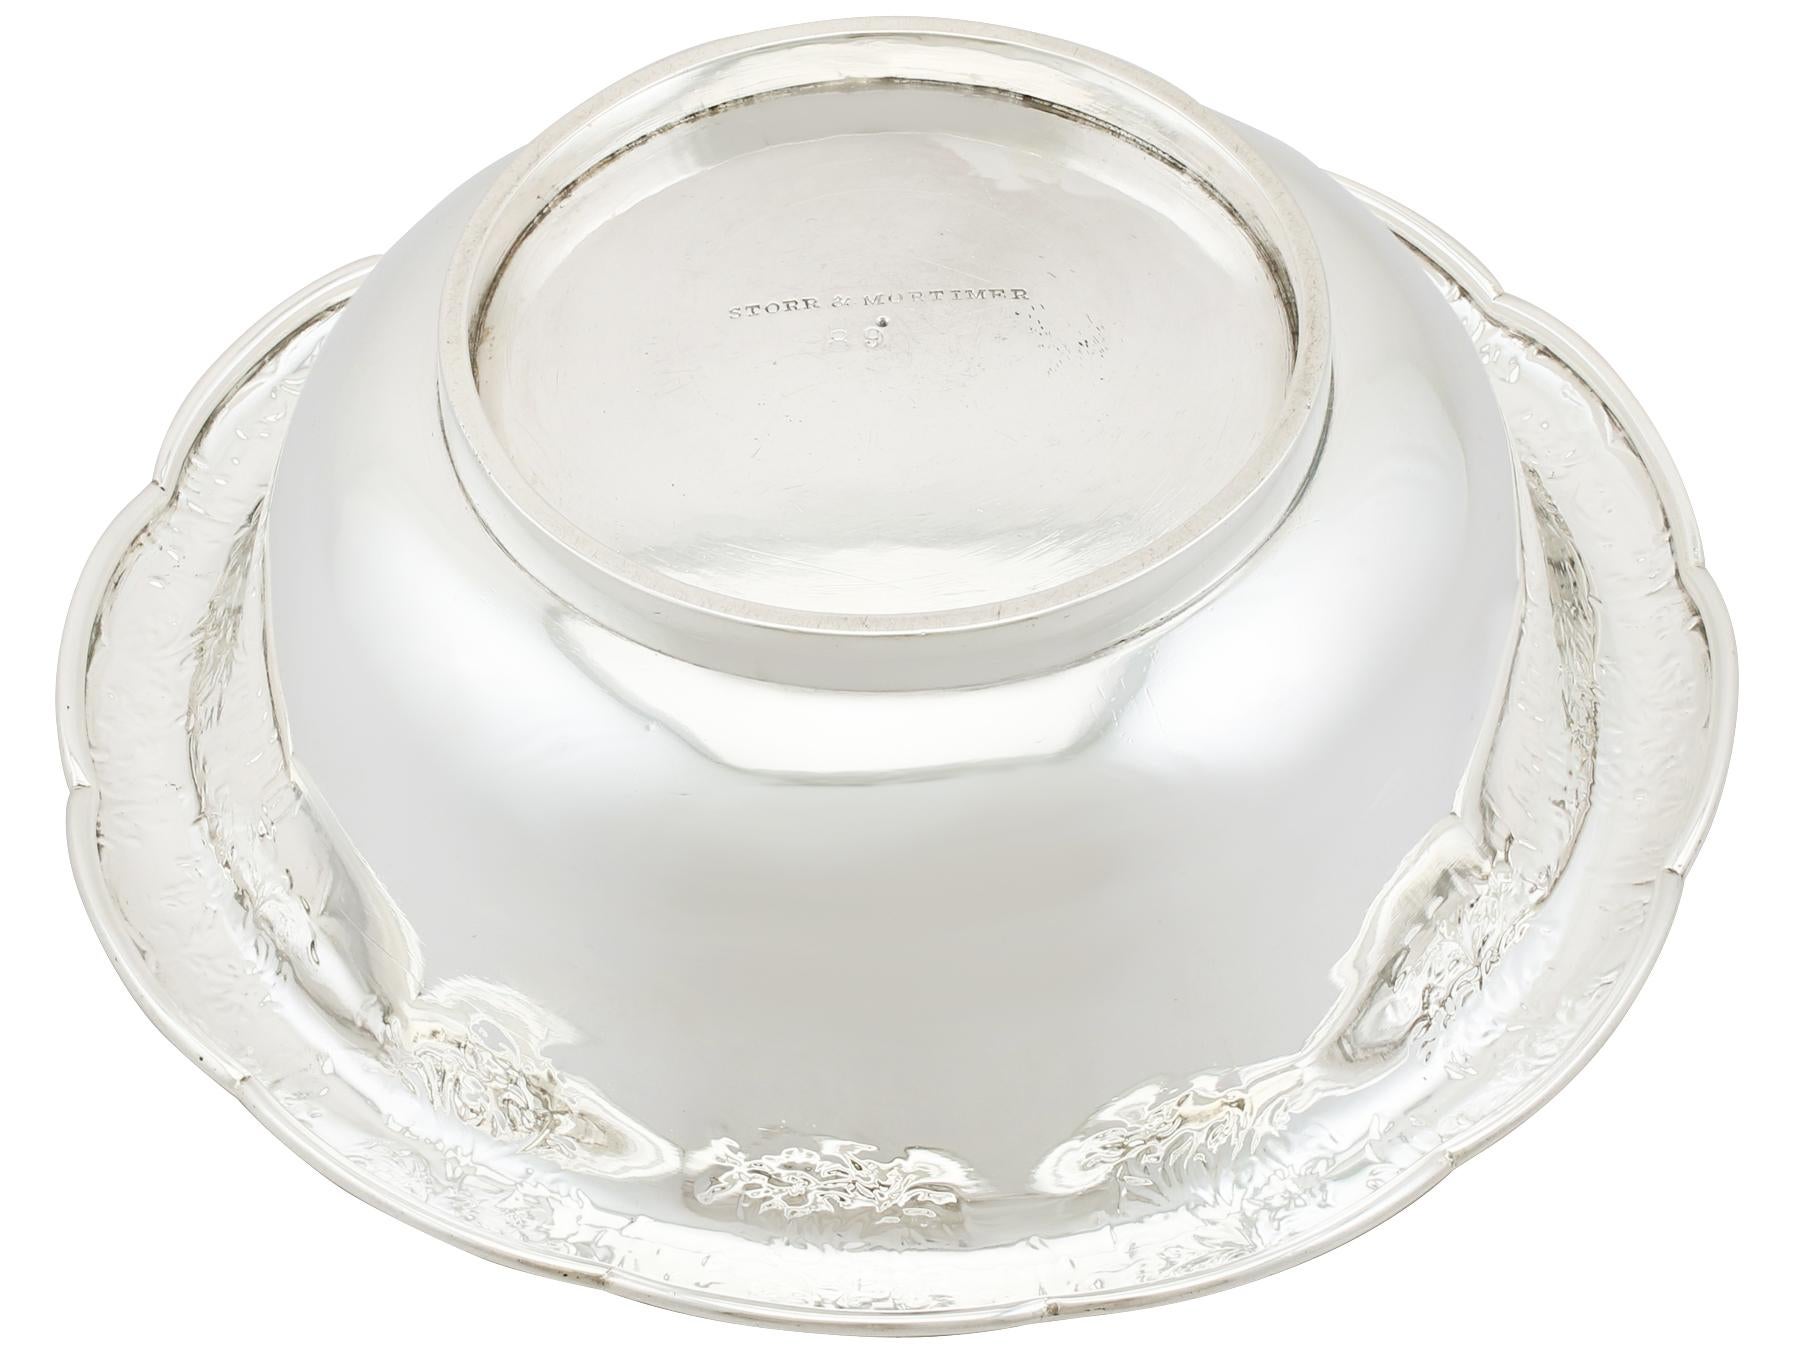 Antique Sterling Silver Bowl by Paul Storr, 1834 2